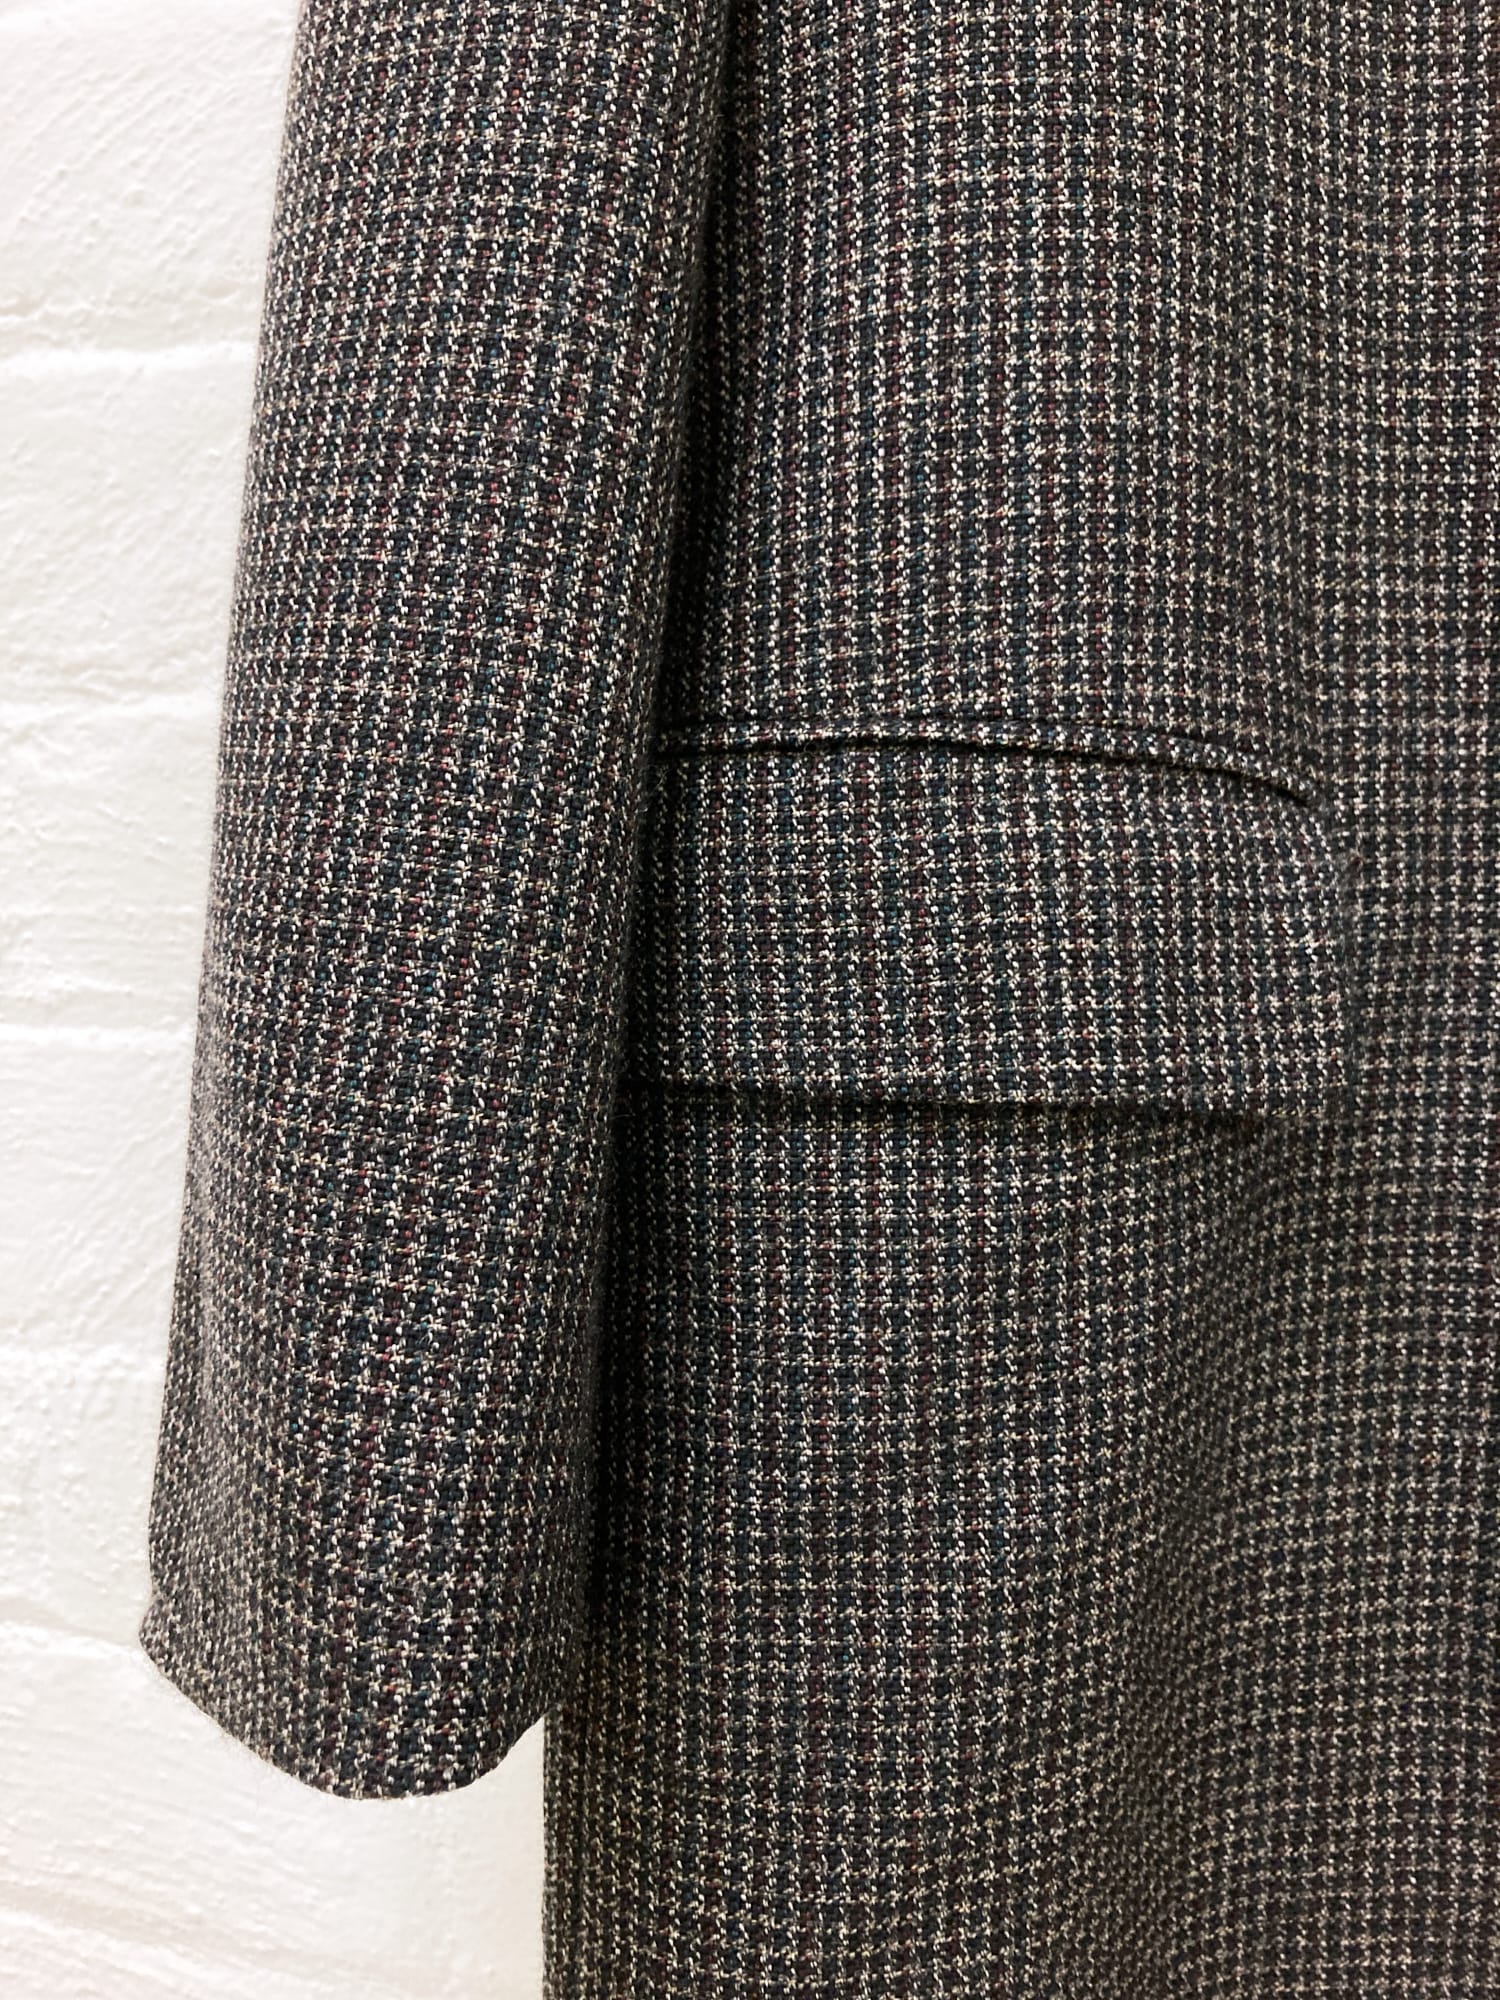 Comme des Garcons Homme 1997 houndstooth wool covered placket coat - M